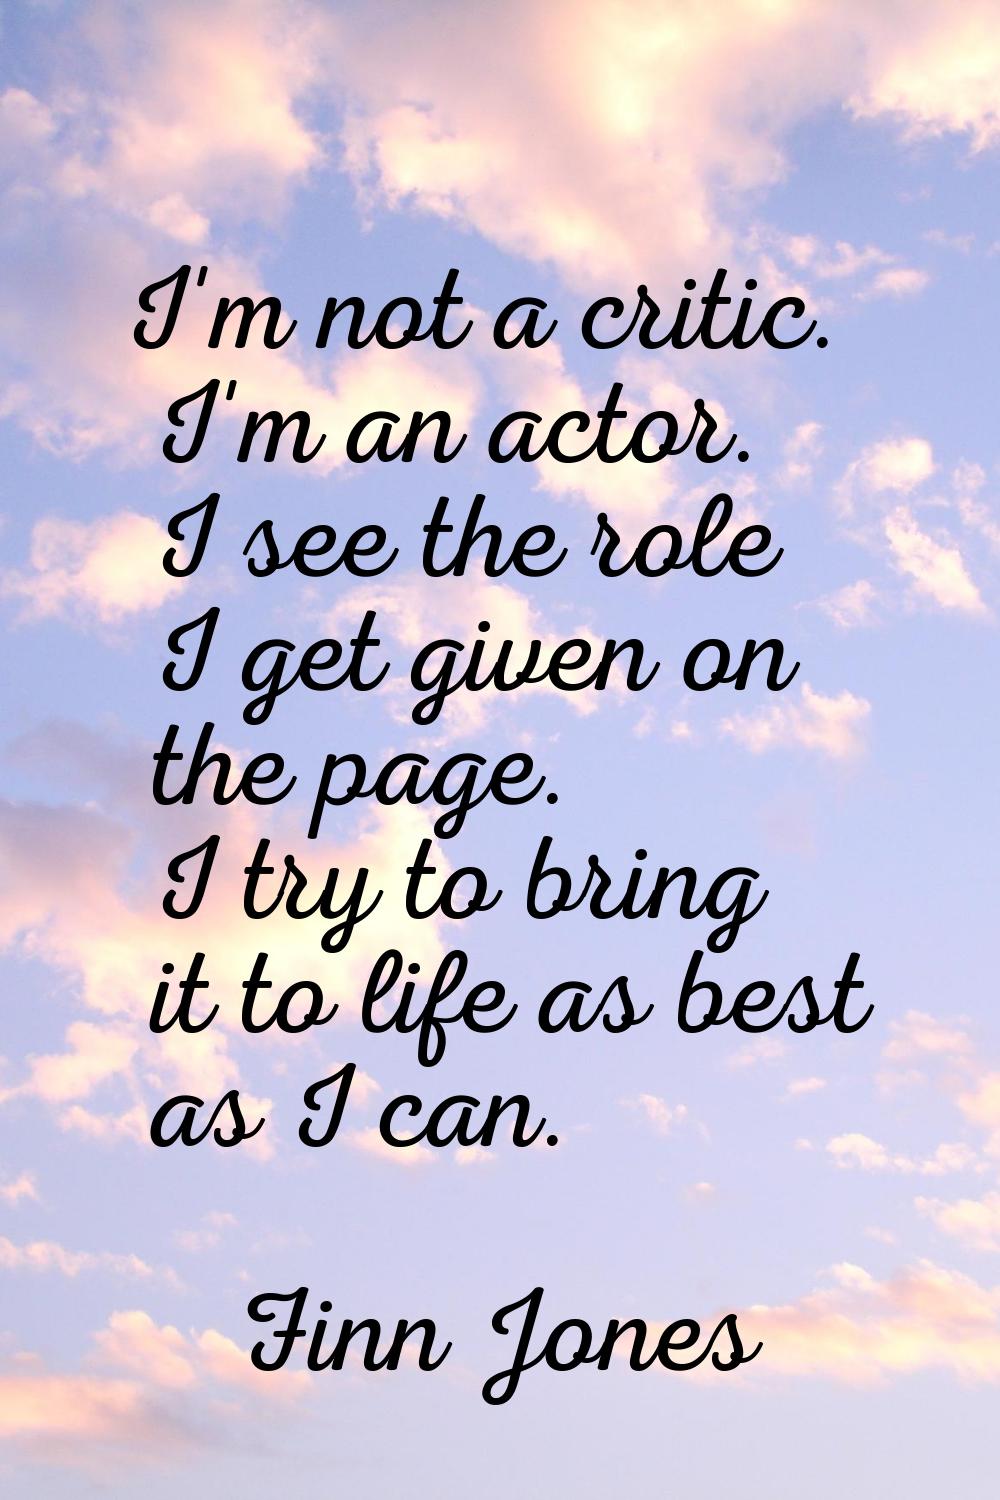 I'm not a critic. I'm an actor. I see the role I get given on the page. I try to bring it to life a